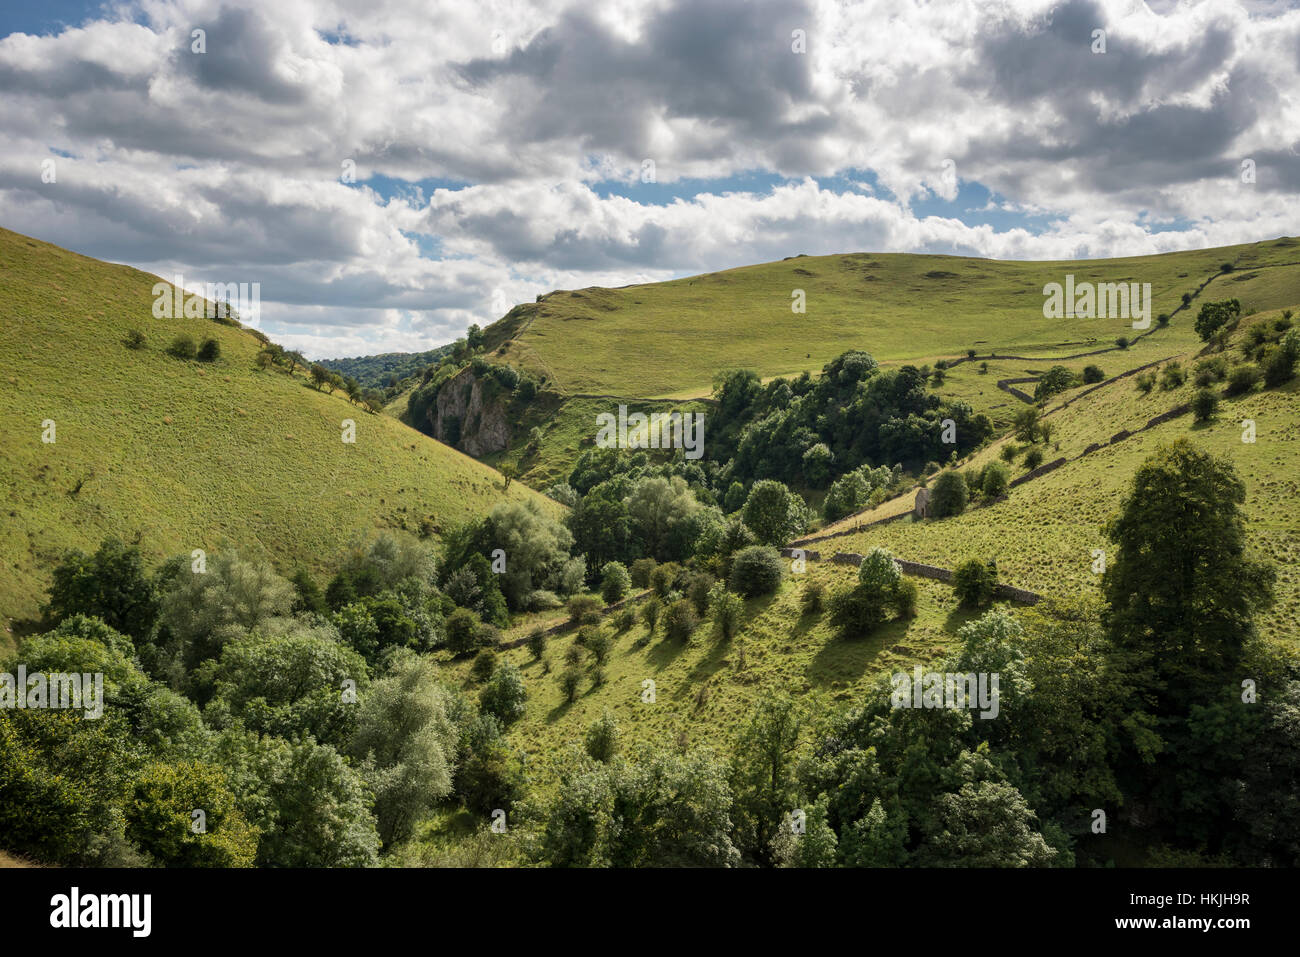 Beautiful scenery near Milldale in the Peak District national park. The steep slopes of Dovedale on a summer day. Stock Photo